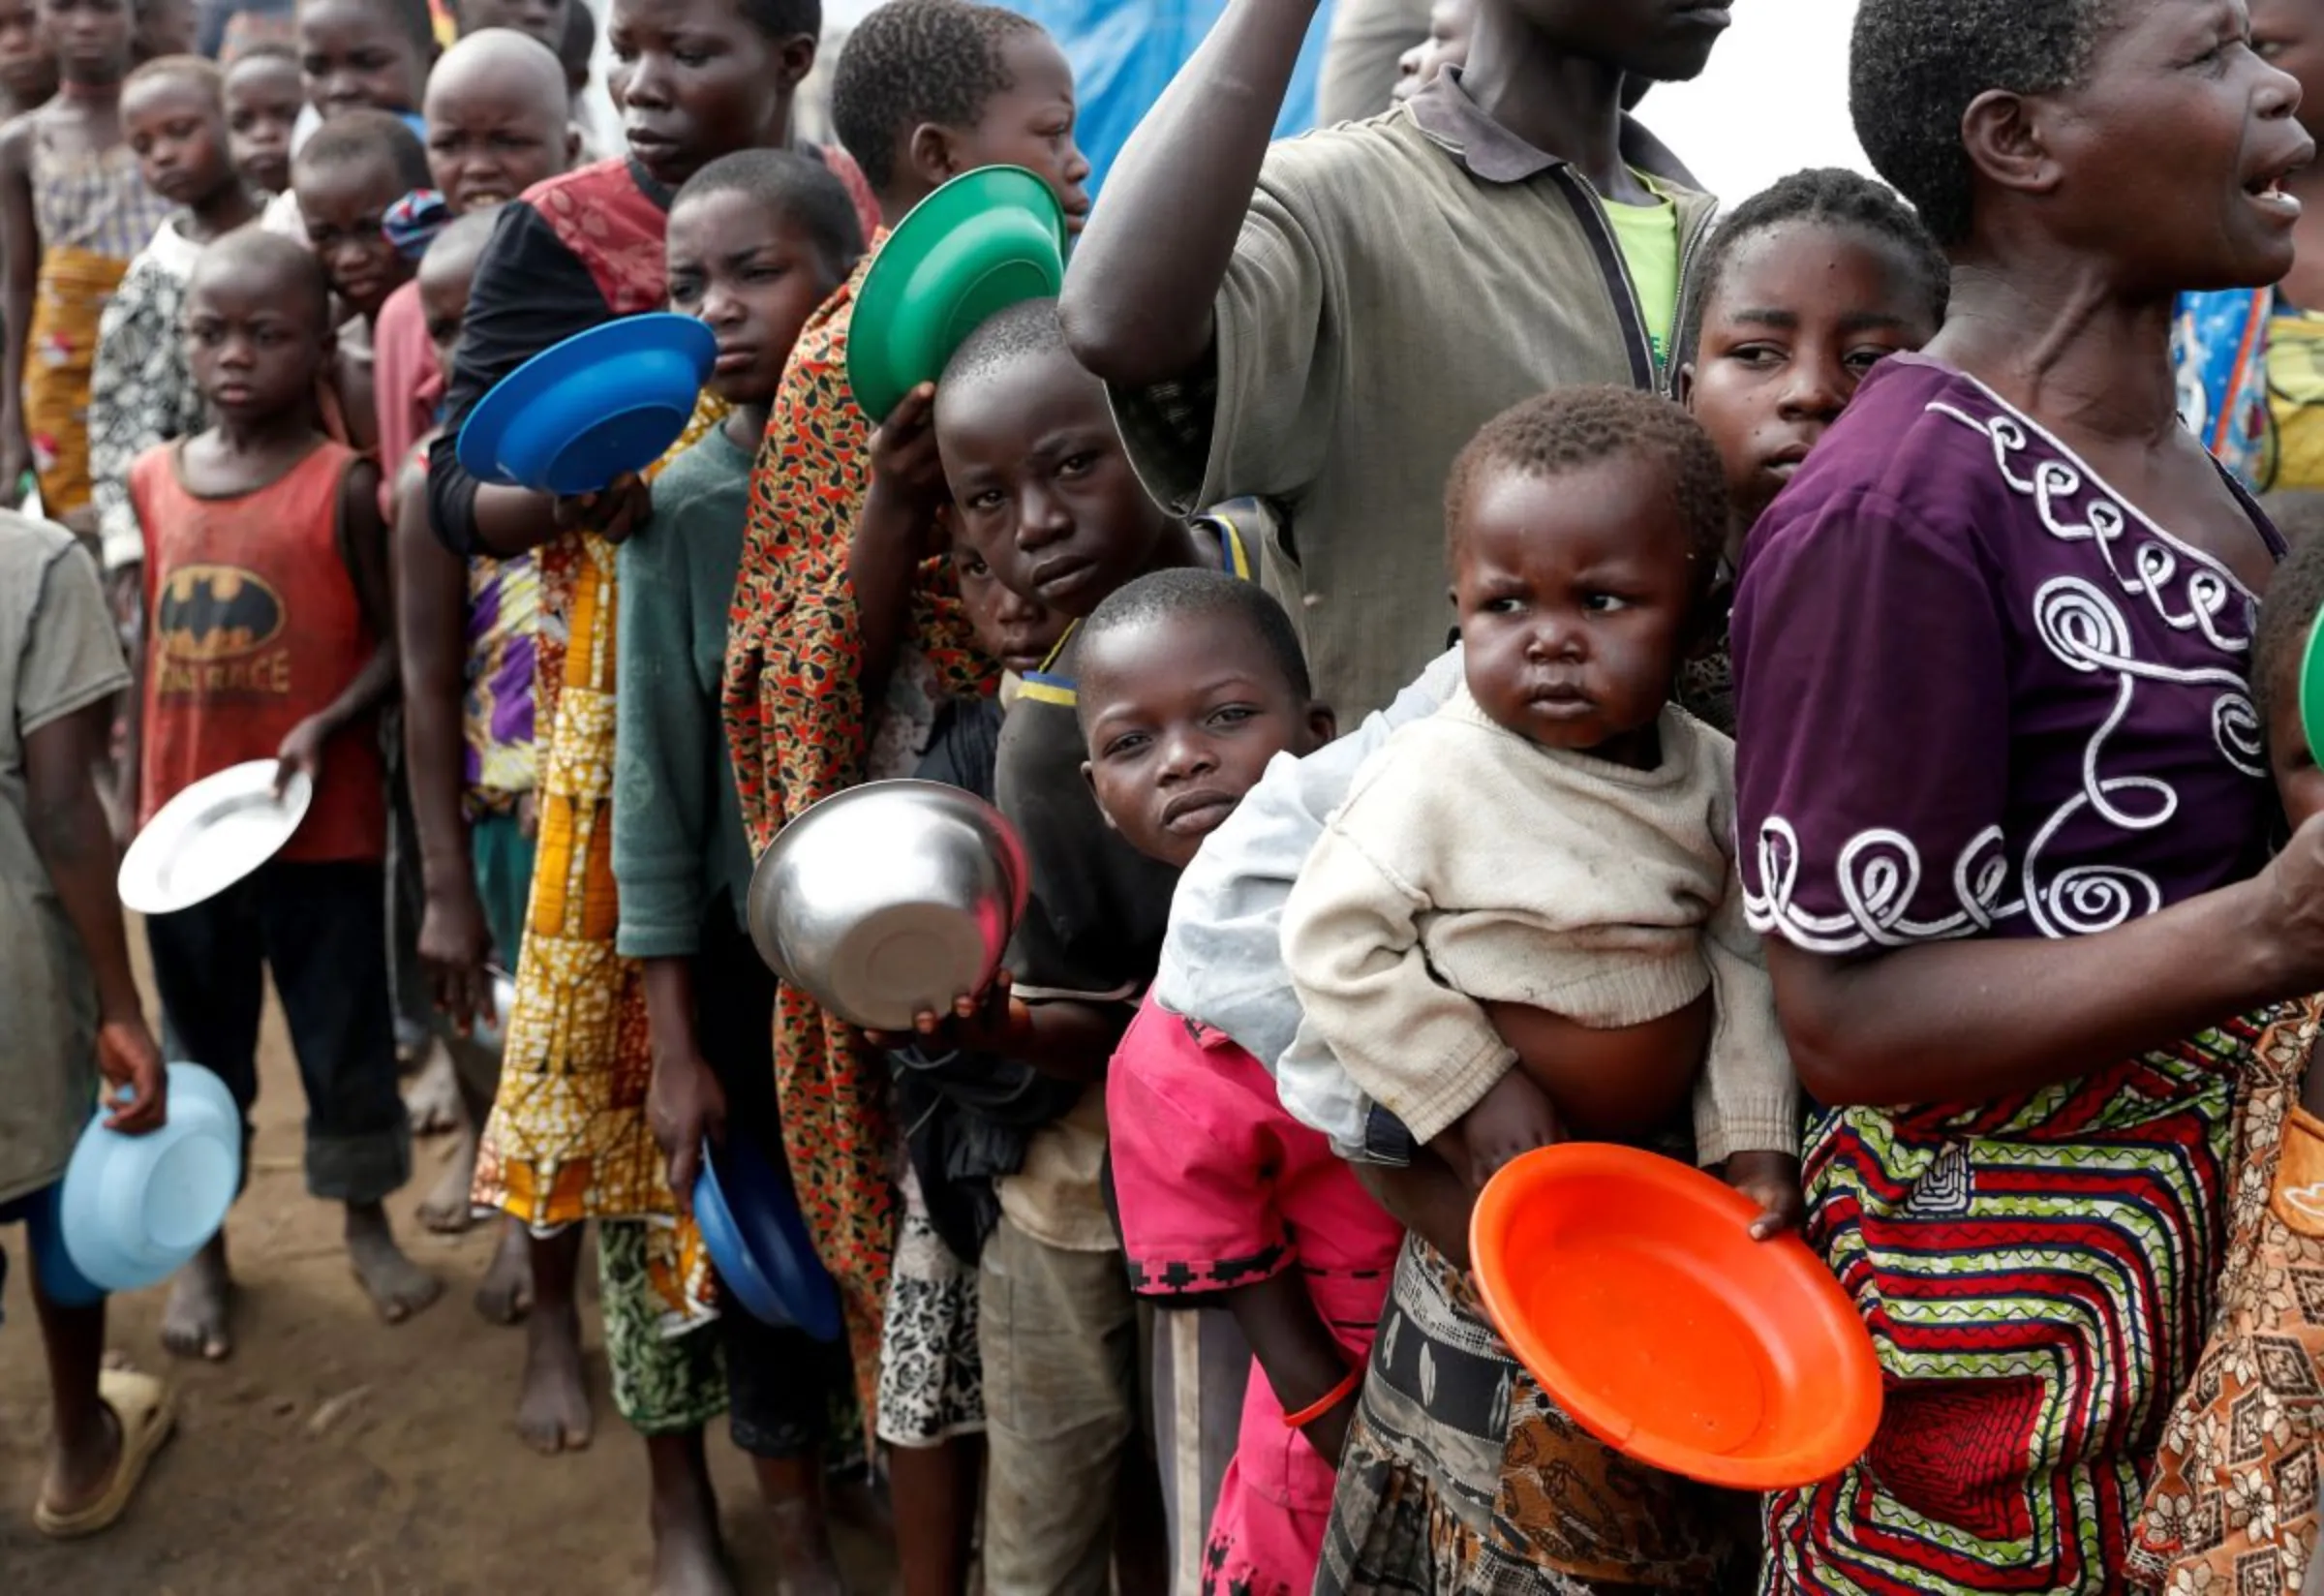 Internally displaced people wait for food distribution at an internally displaced persons (IDP) camp in Bunia, Ituri province, eastern Democratic Republic of Congo, April 12, 2018